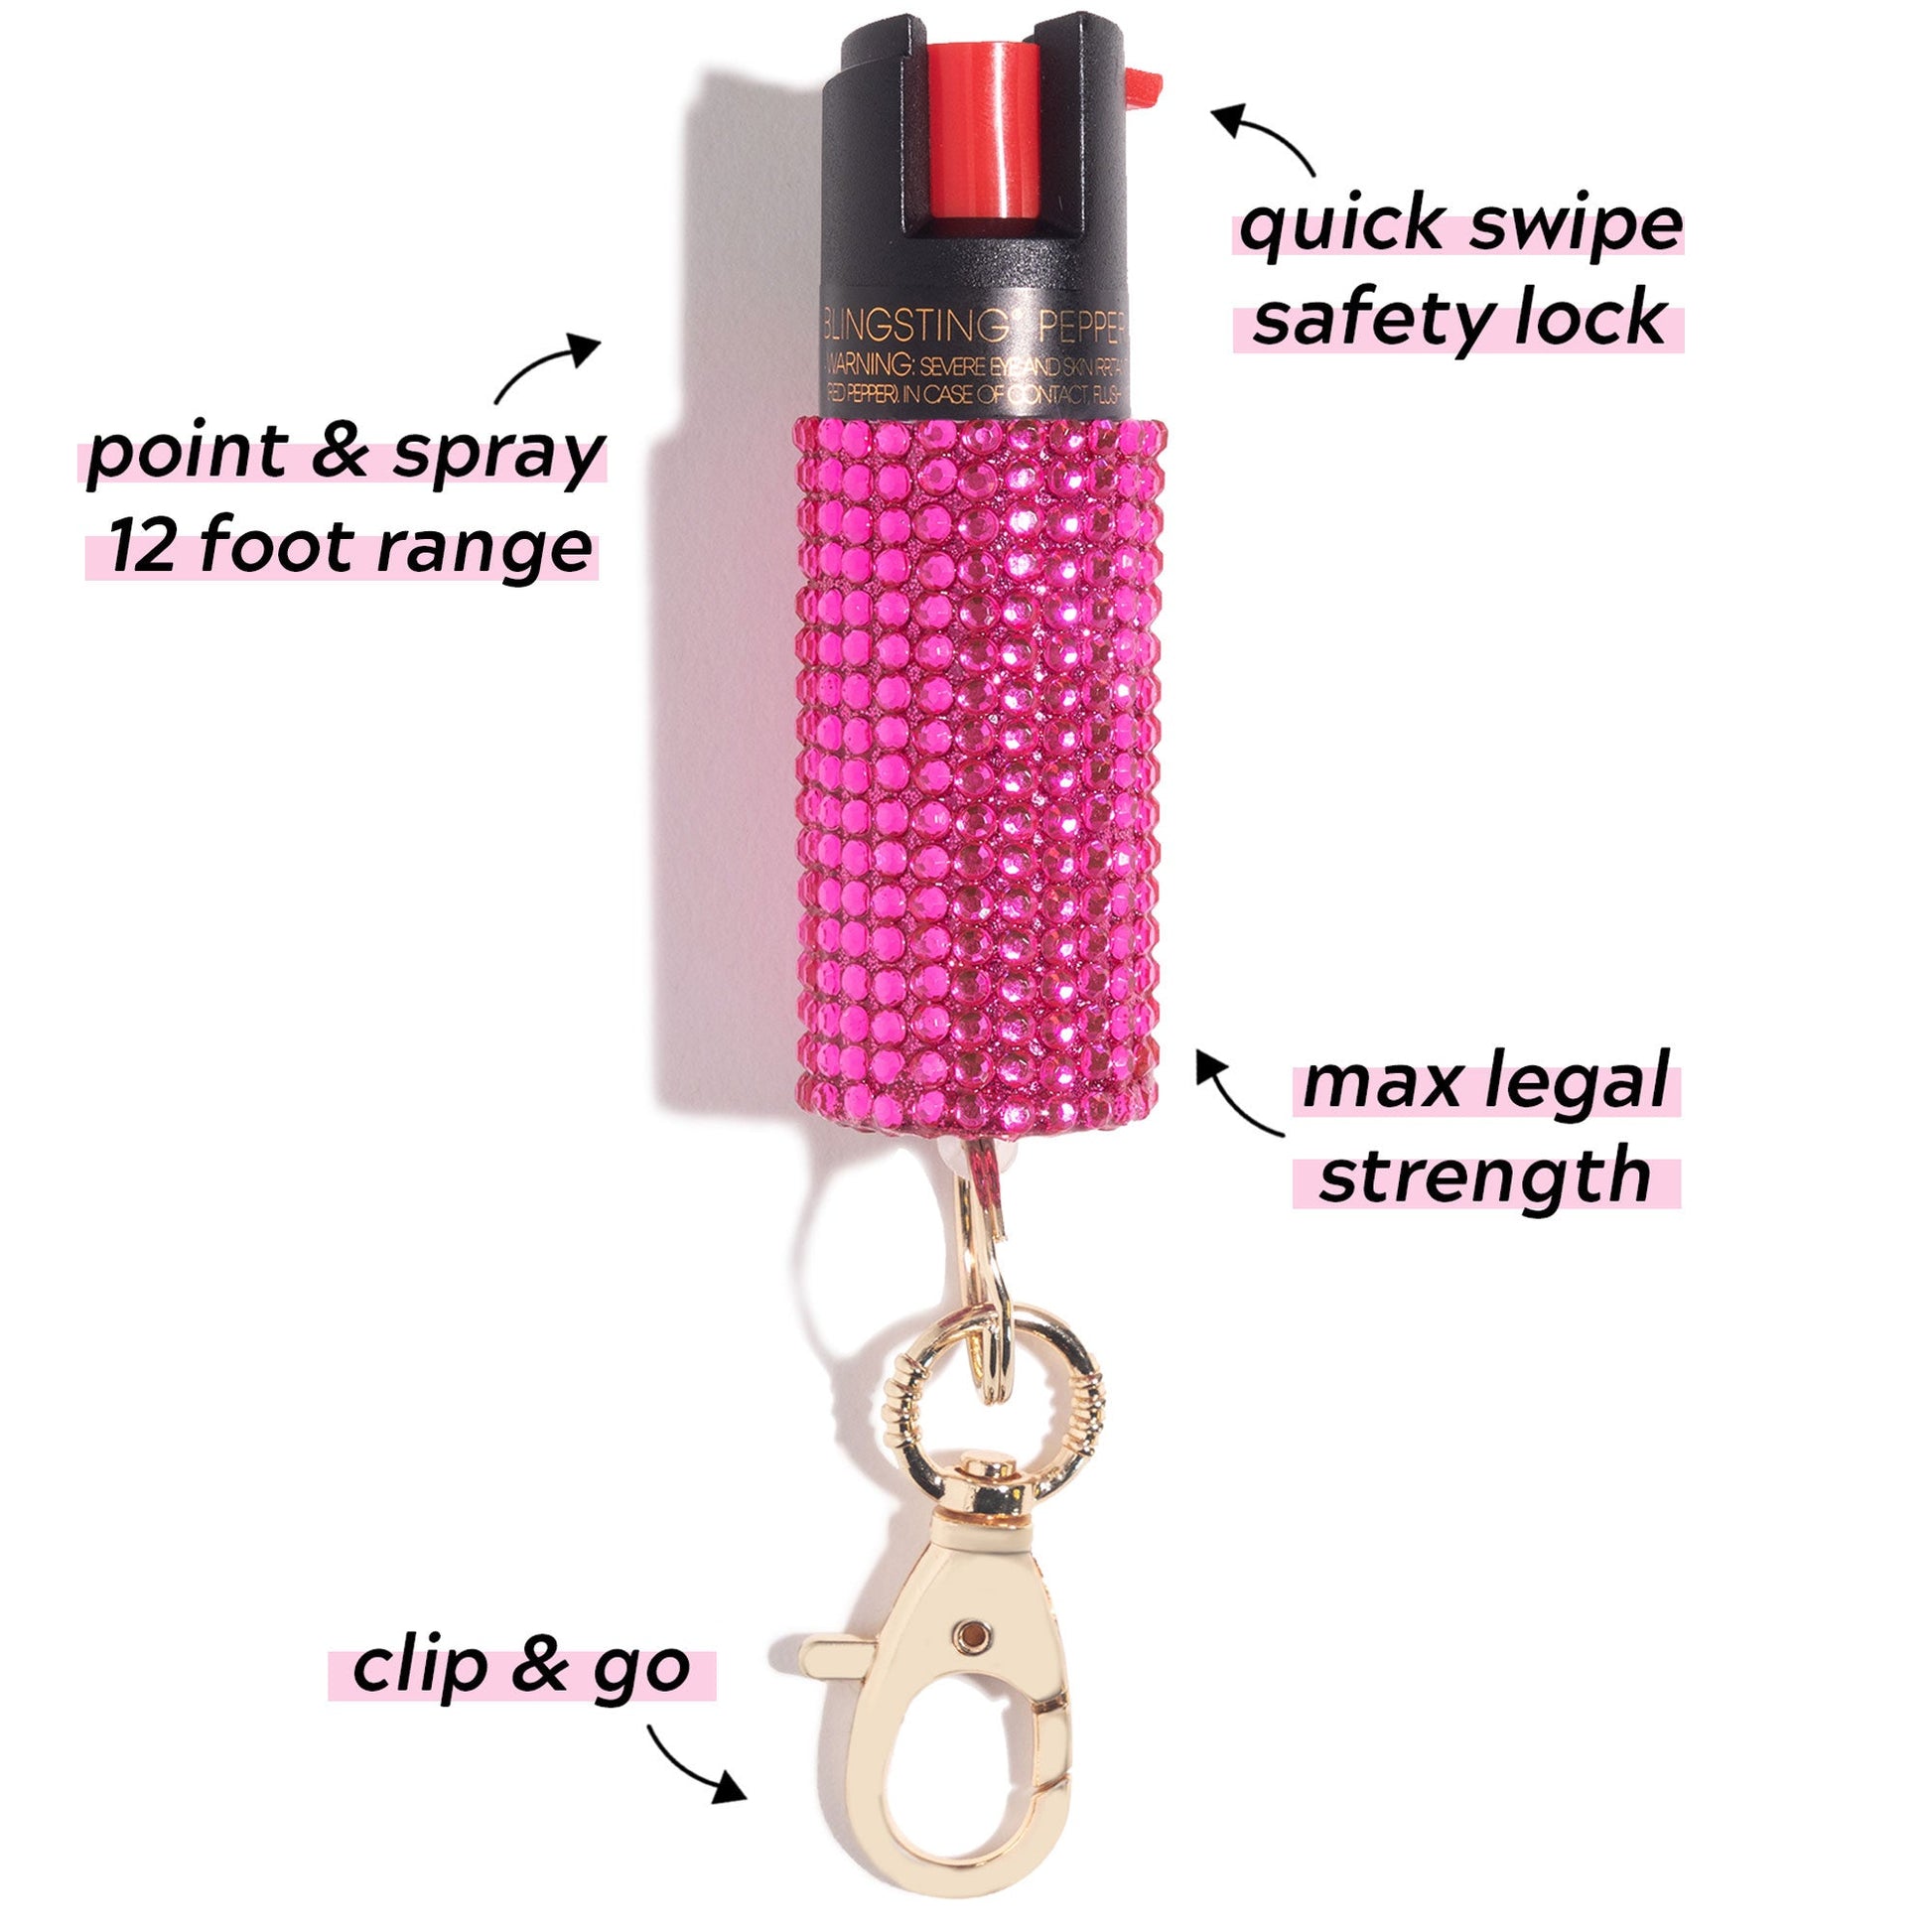 BLINGSTING Essentials Pepper Spray with Key Ring, 0.5 oz, Pink